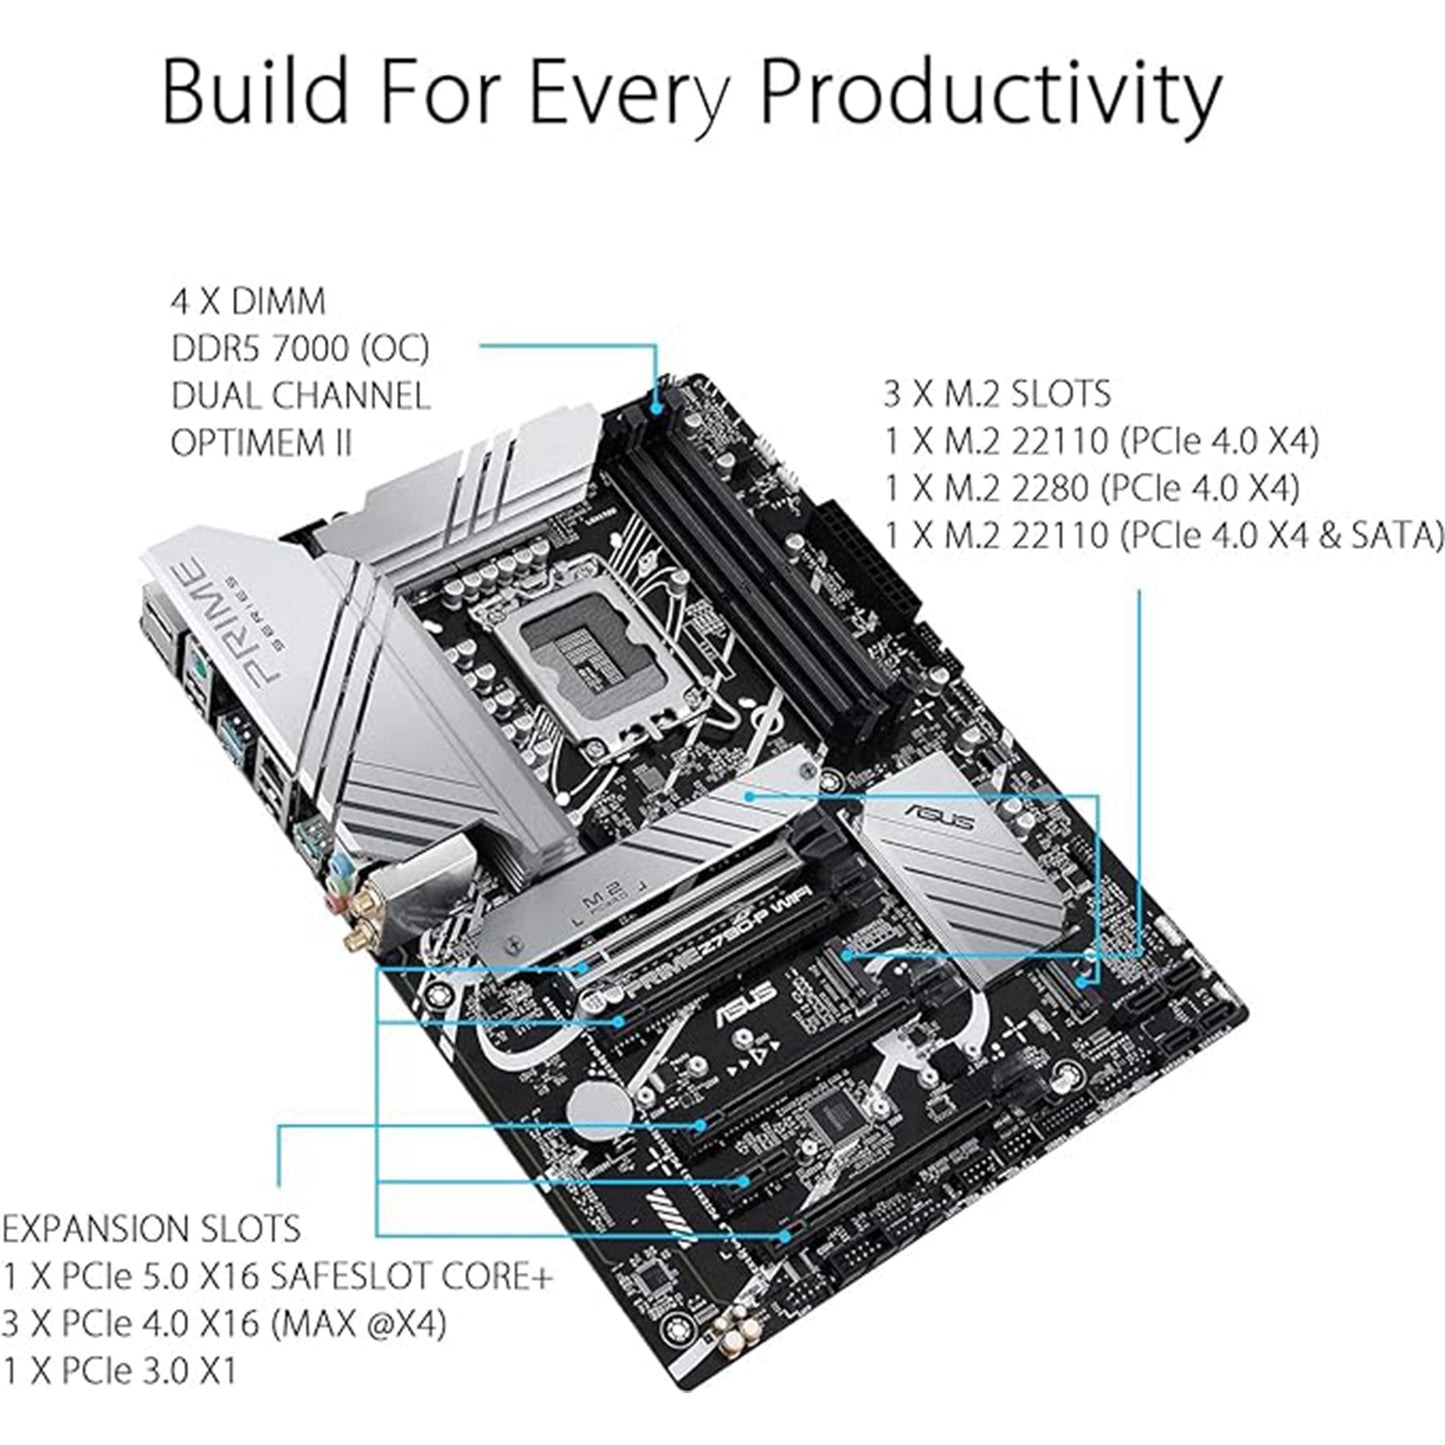 Micro Center Intel Core i5-12600K 10 (6P+4E) Cores up to 4.9 GHz Unlocked LGA 1700 Desktop Processor with Integrated Intel UHD Graphics 770 Bundle with ASUS Prime Z790-P WiFi DDR5 Gaming Motherboard